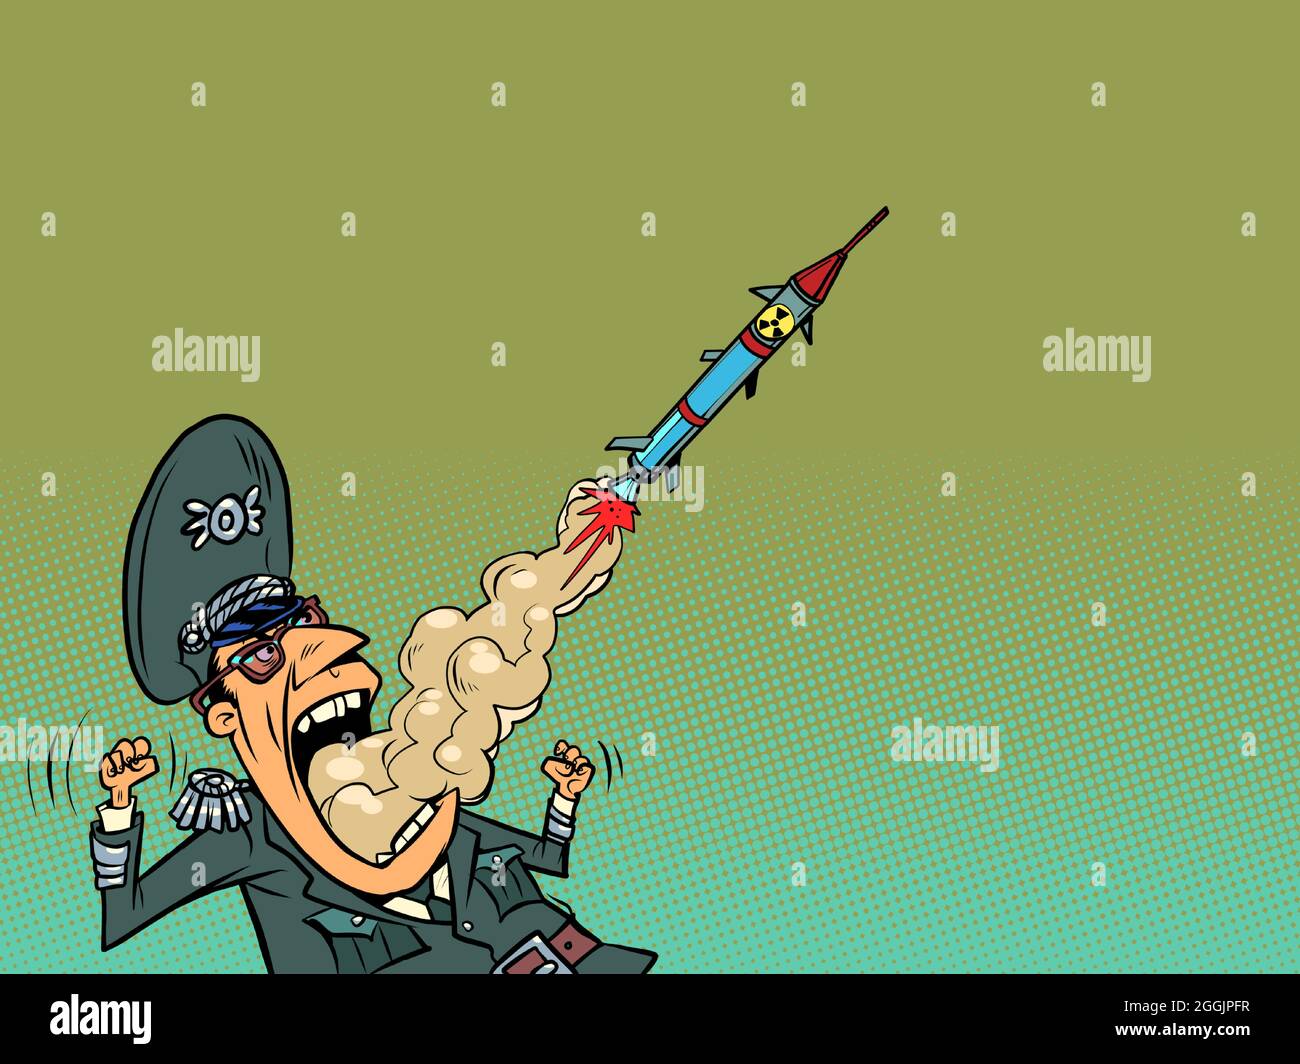 A military general releases missiles and unleashes a war. Aggressive speech and politics Stock Vector